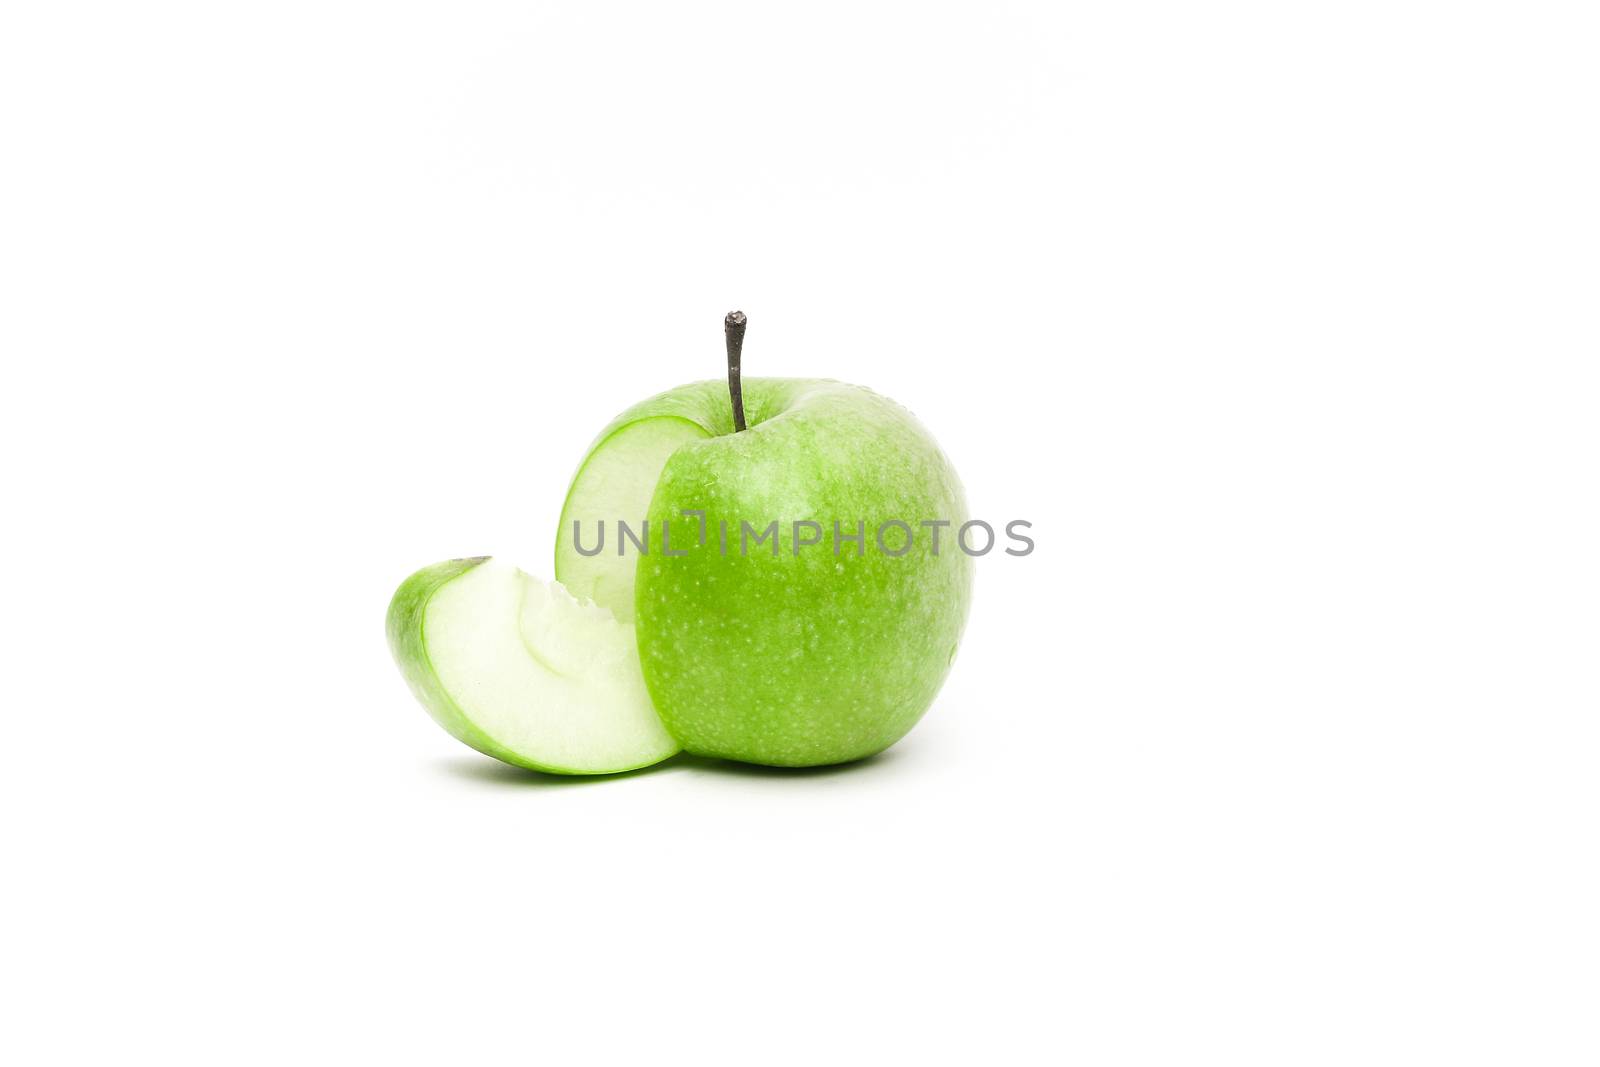 Gorgeous ripe fresh apple with a sliced piece falling from it